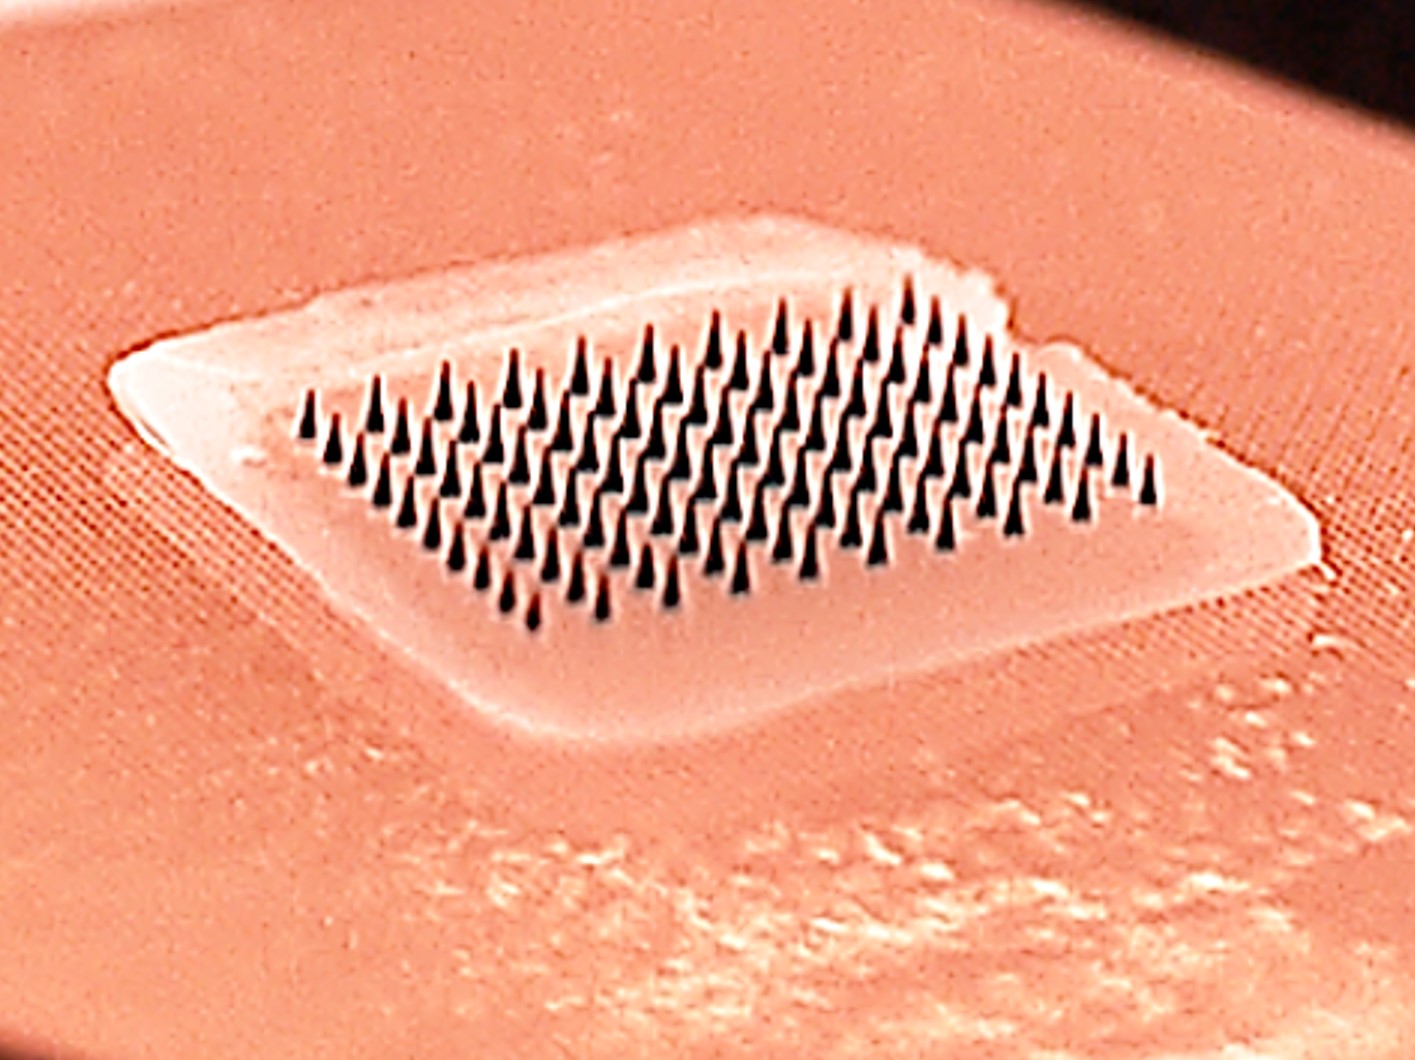 This close-up image shows a microneedle array containing influenza vaccine. When pressed into the skin, the tiny needles dissolve, carrying vaccine into the skin. A majority of study participants said they would prefer to receive the influenza vaccine using patches rather than traditional hypodermic needles.